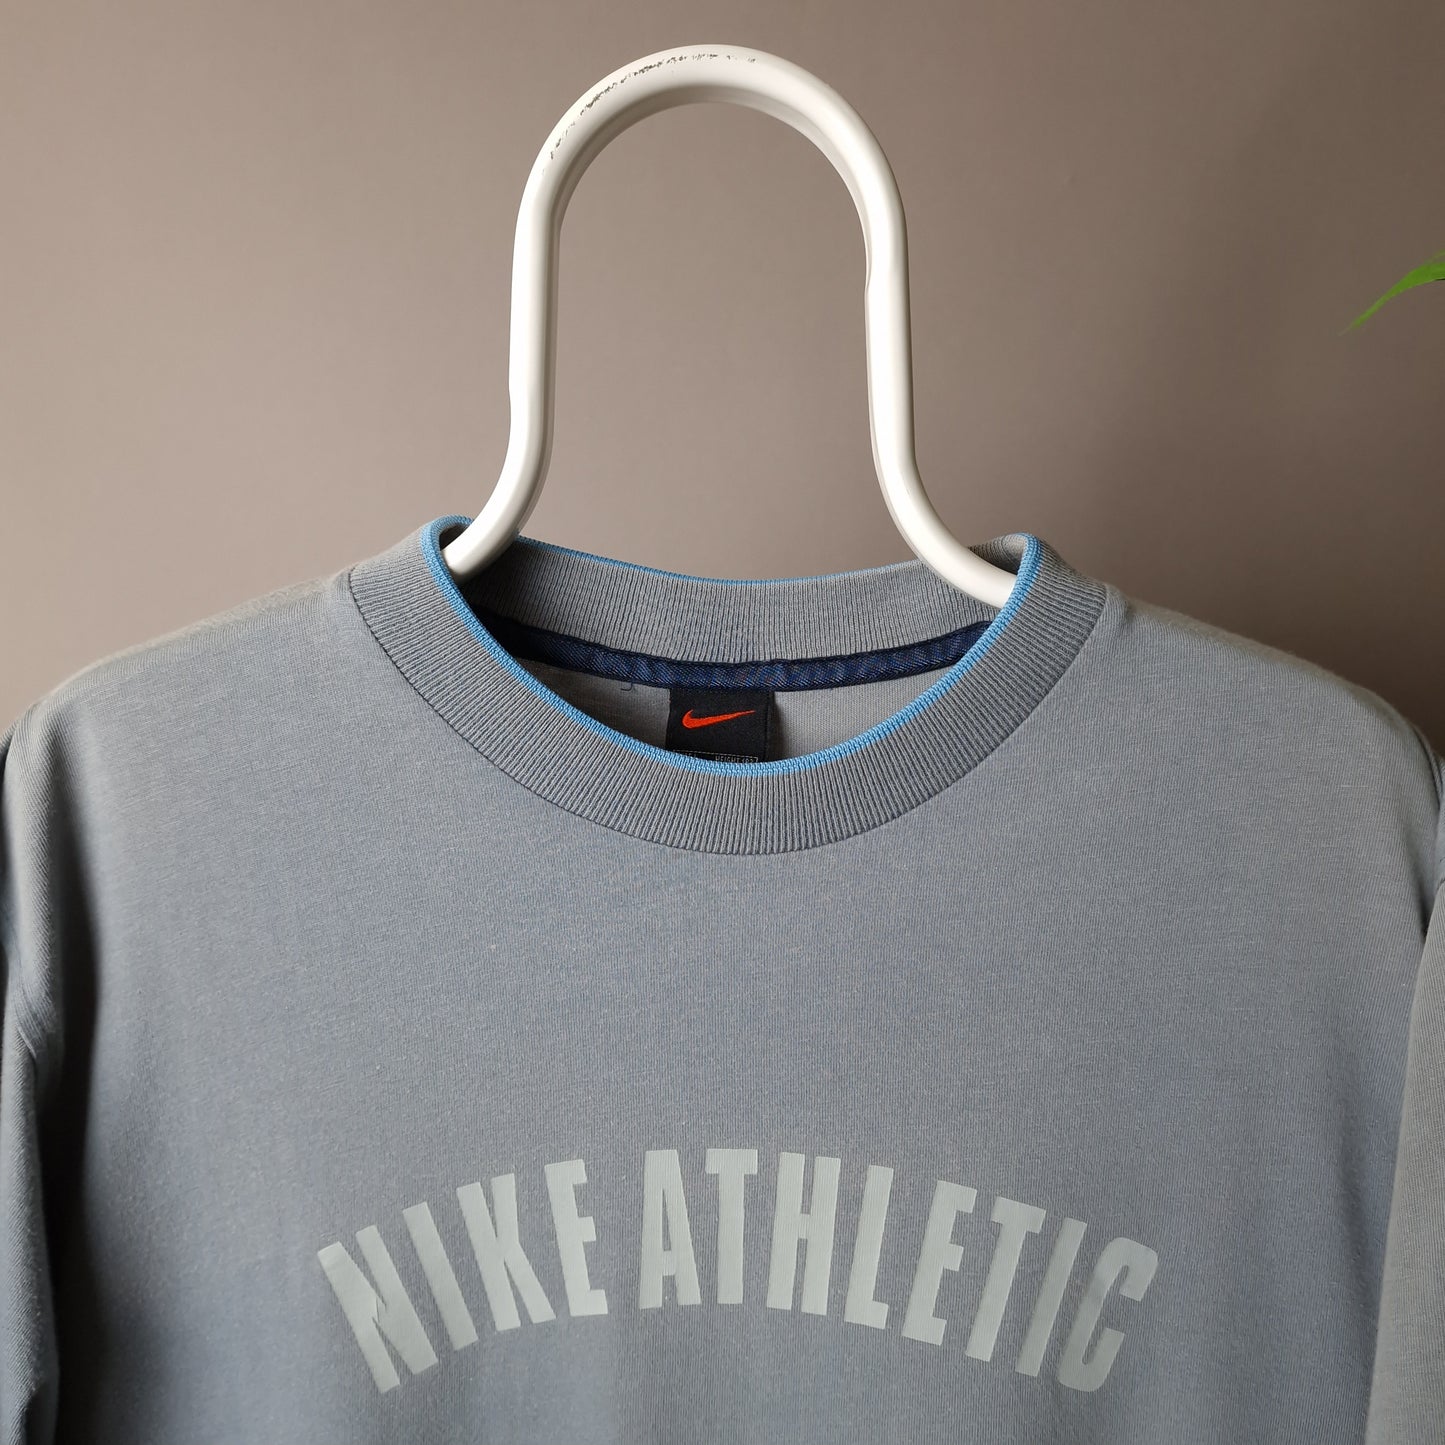 Vintage Nike Athletic t-shirt in grey and baby blue - large